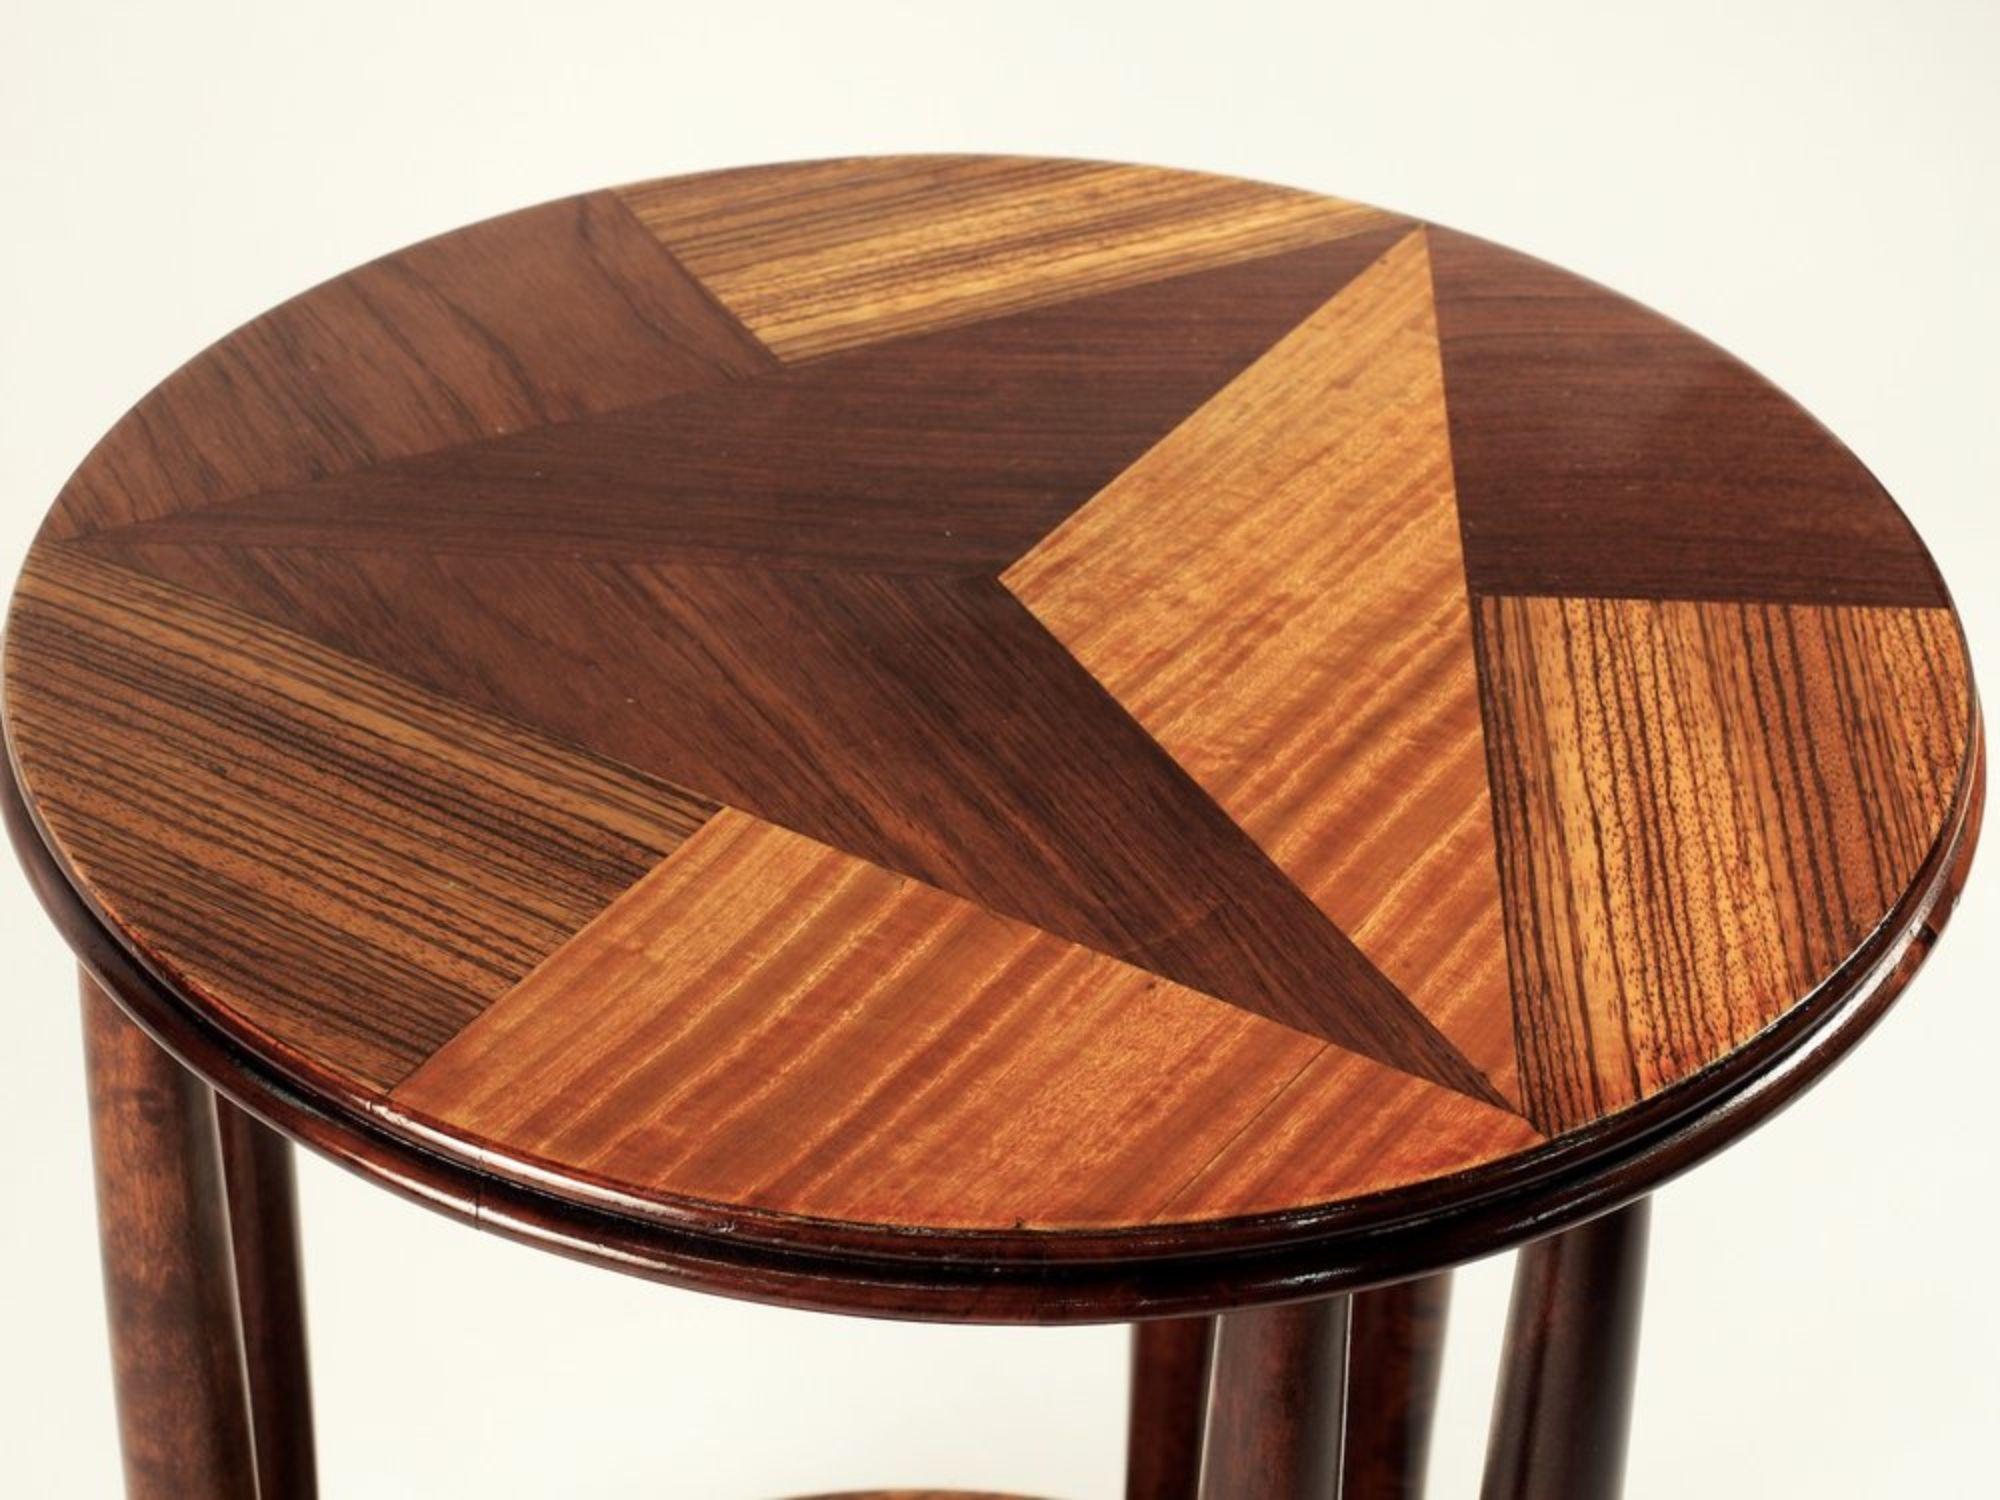 French Modernist Art Deco side table by Andre Groult with Cubist marquetry in a variety of exotic hardwoods. Measures: 17